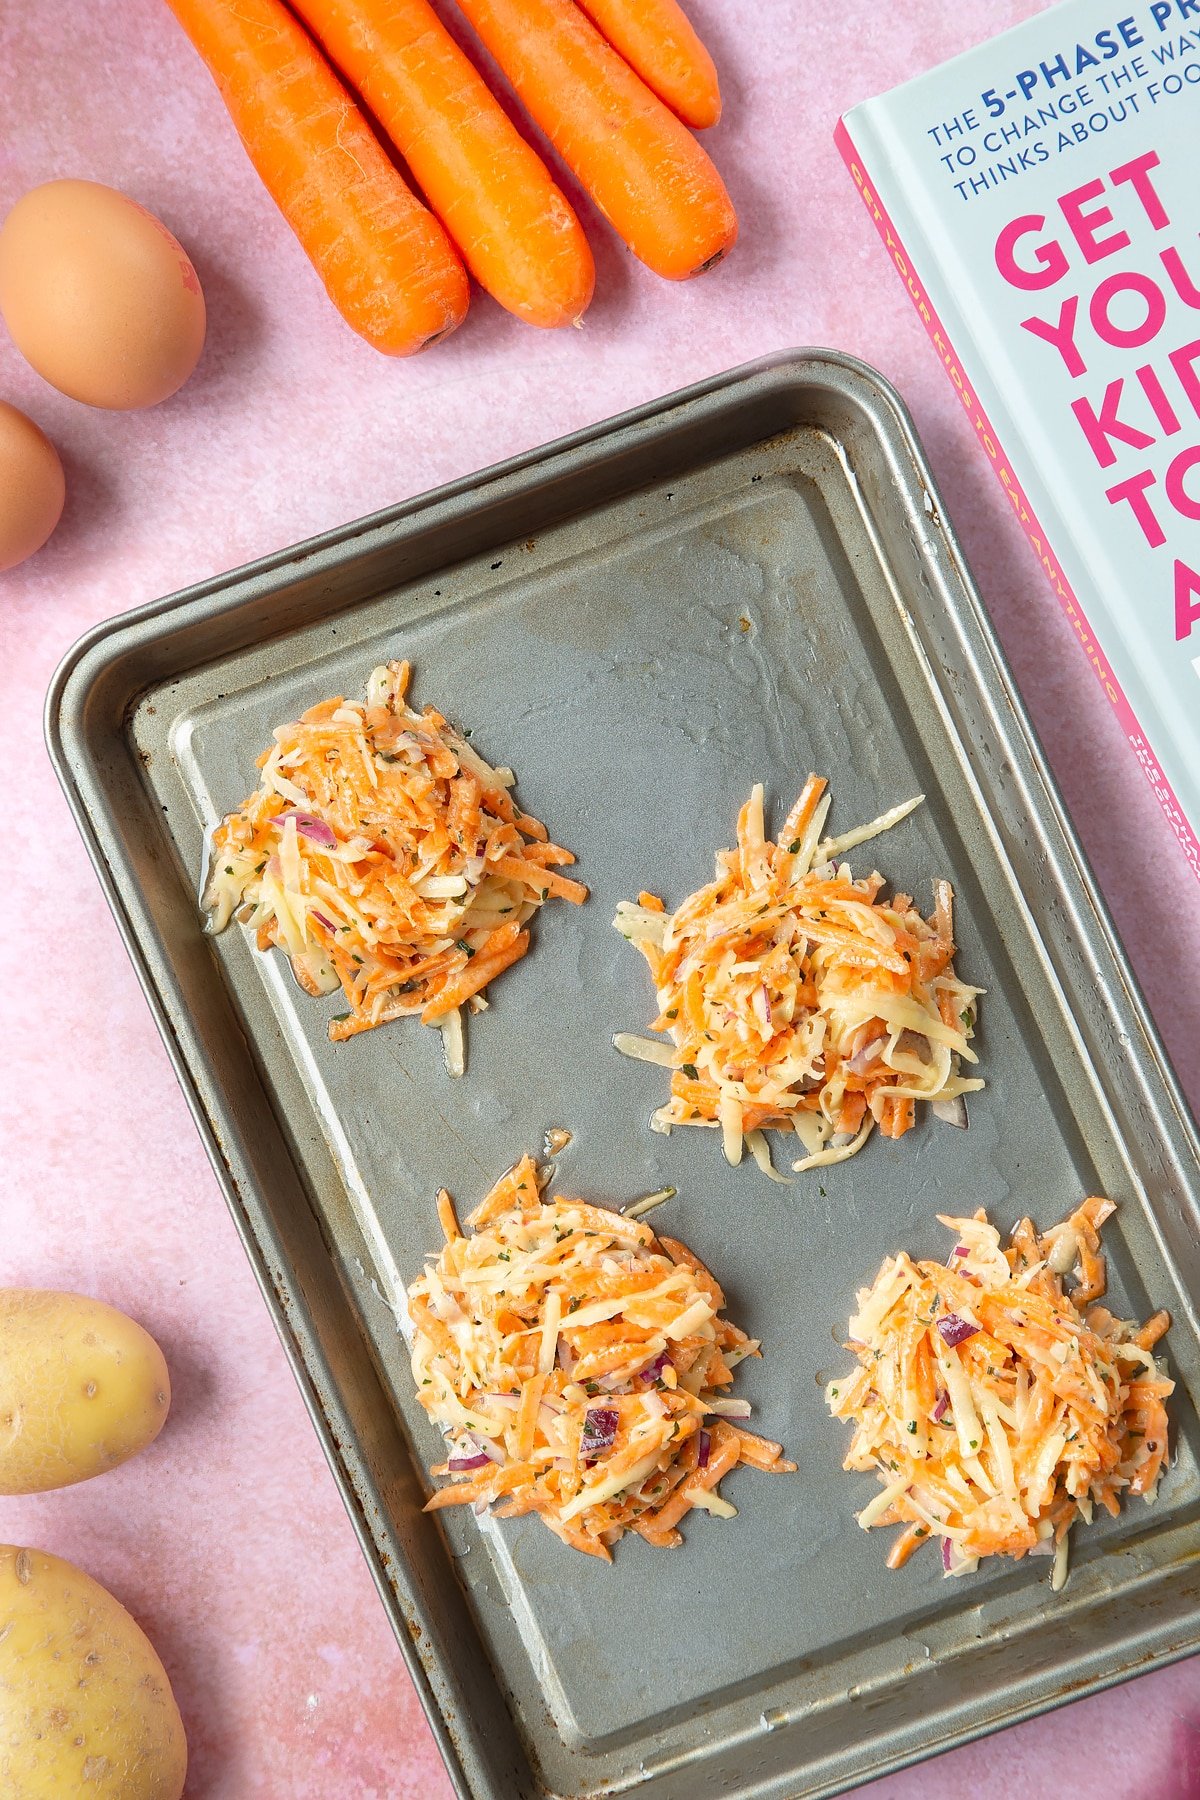 Four mounds of carrot patty mix on an oiled baking tray. The tray is surrounded by ingredients to make carrot patties.